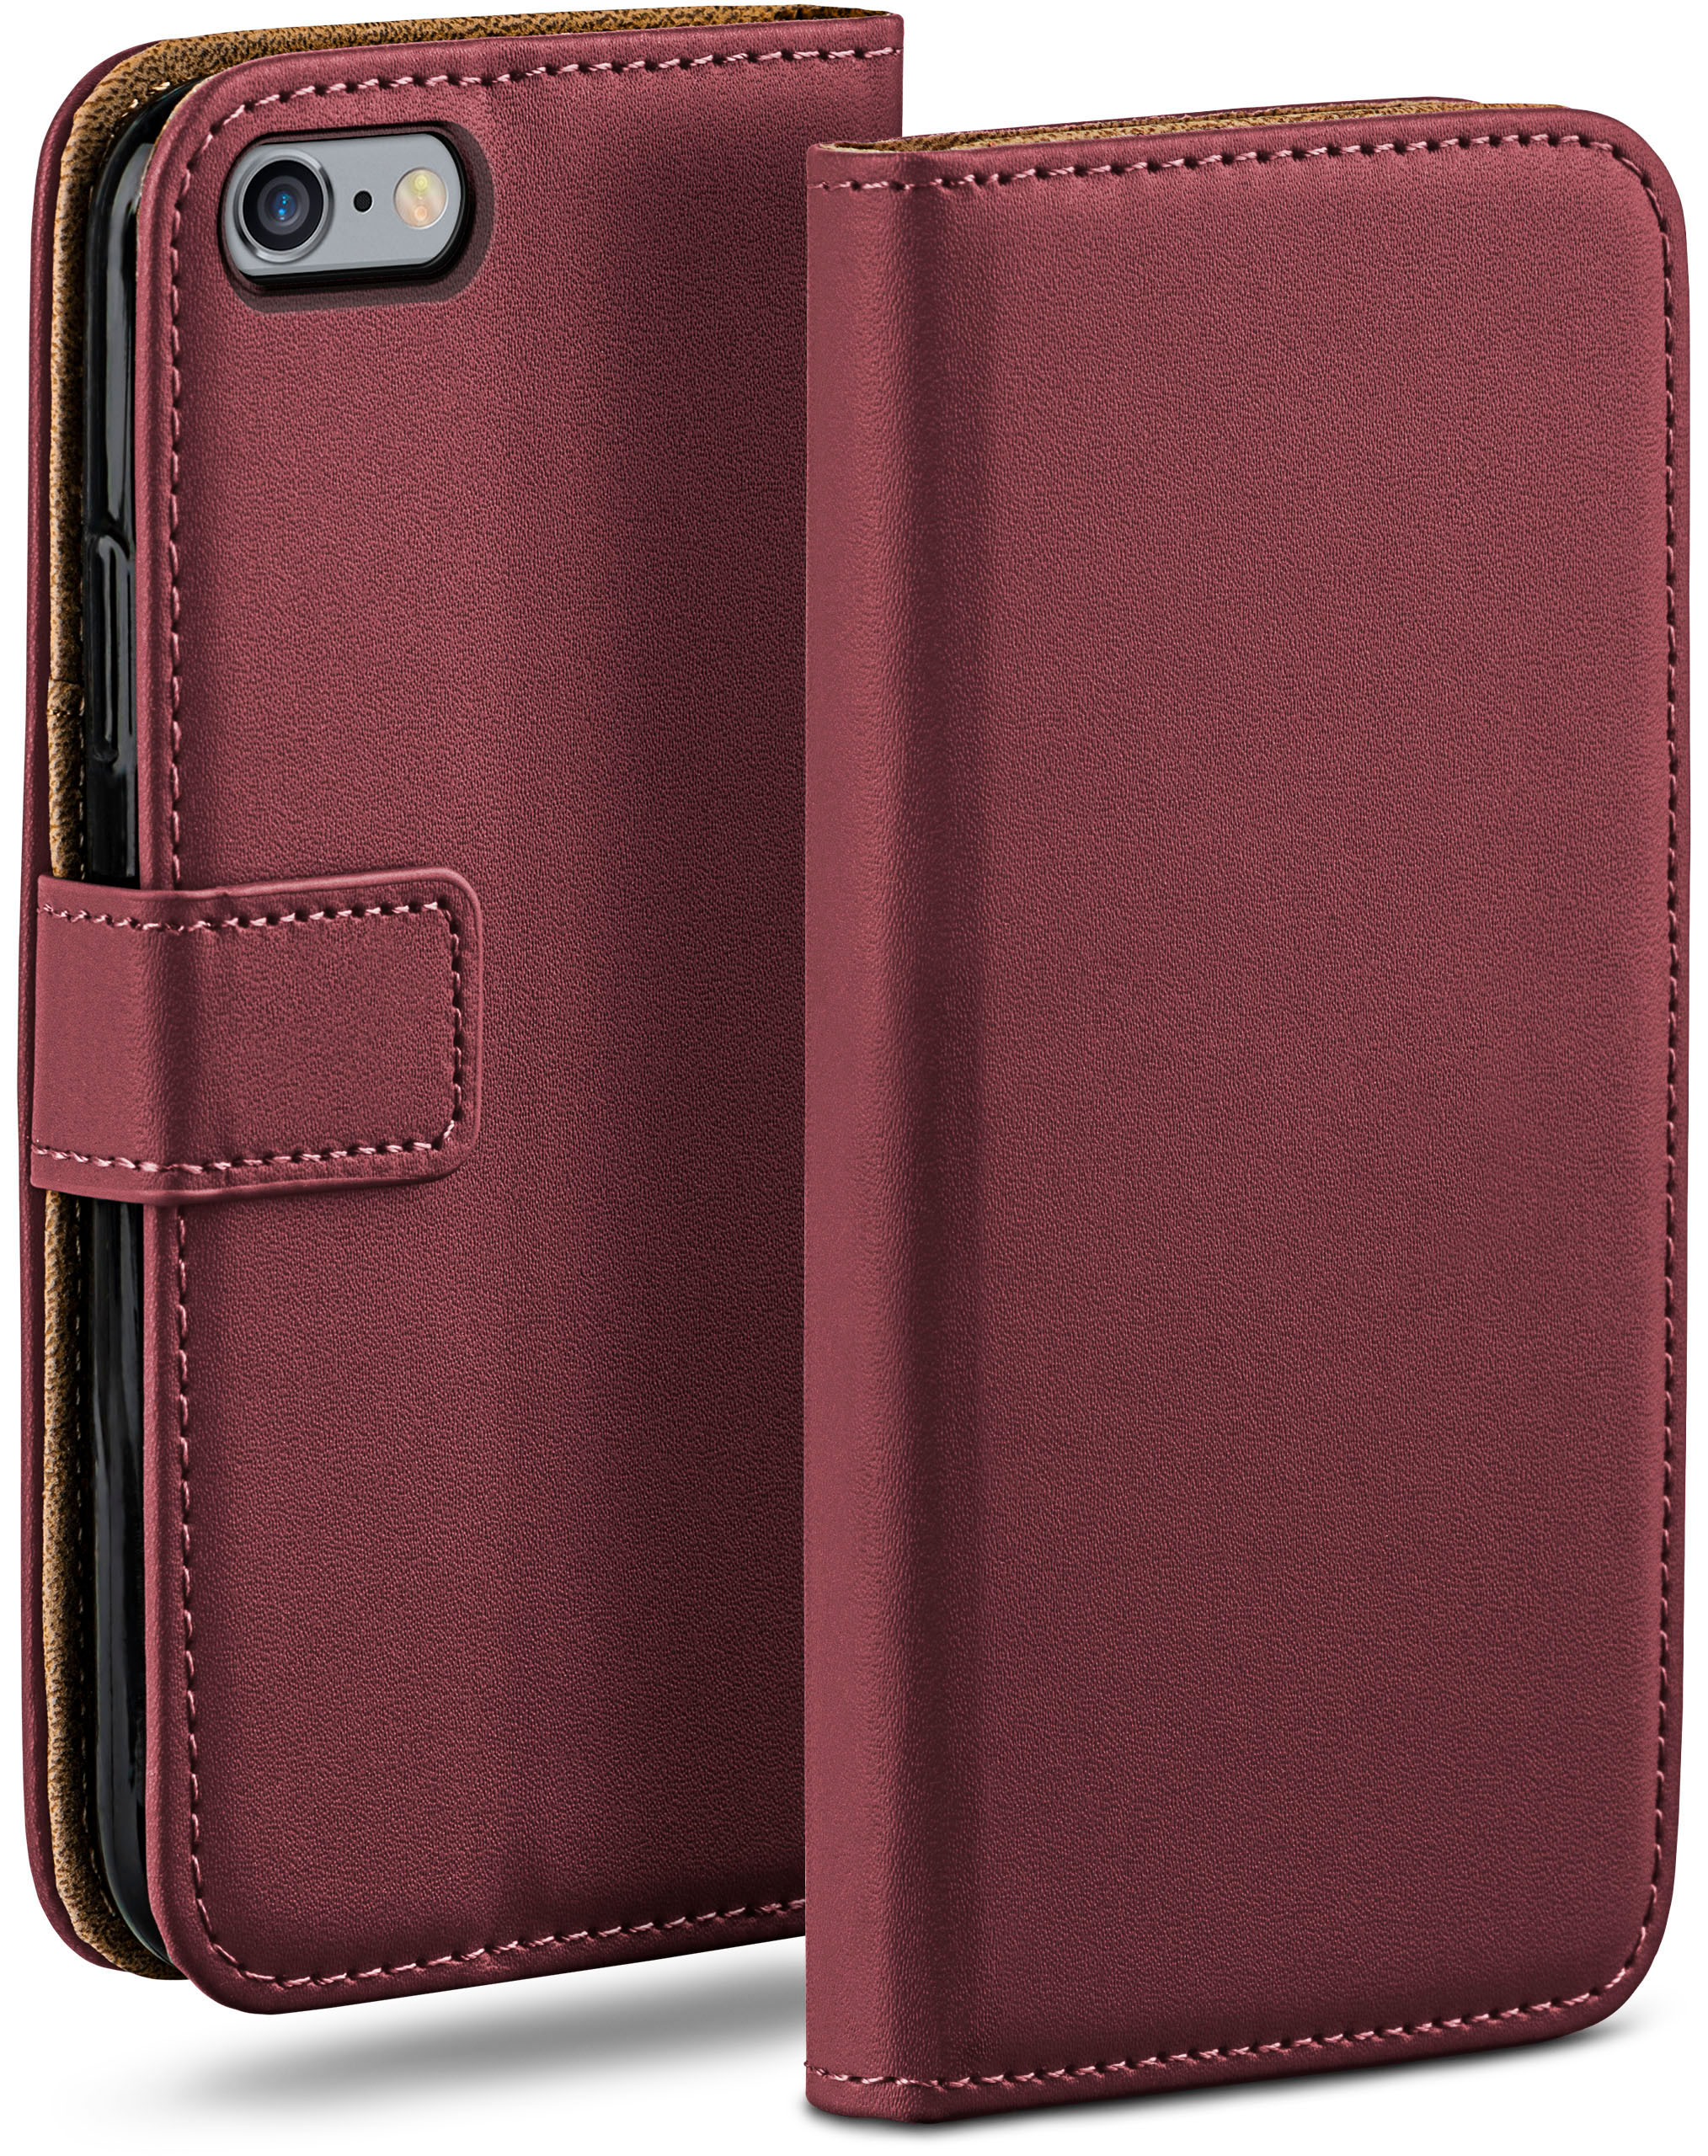 MOEX Book Case, iPhone Bookcover, Apple, / iPhone 6s 6, Maroon-Red